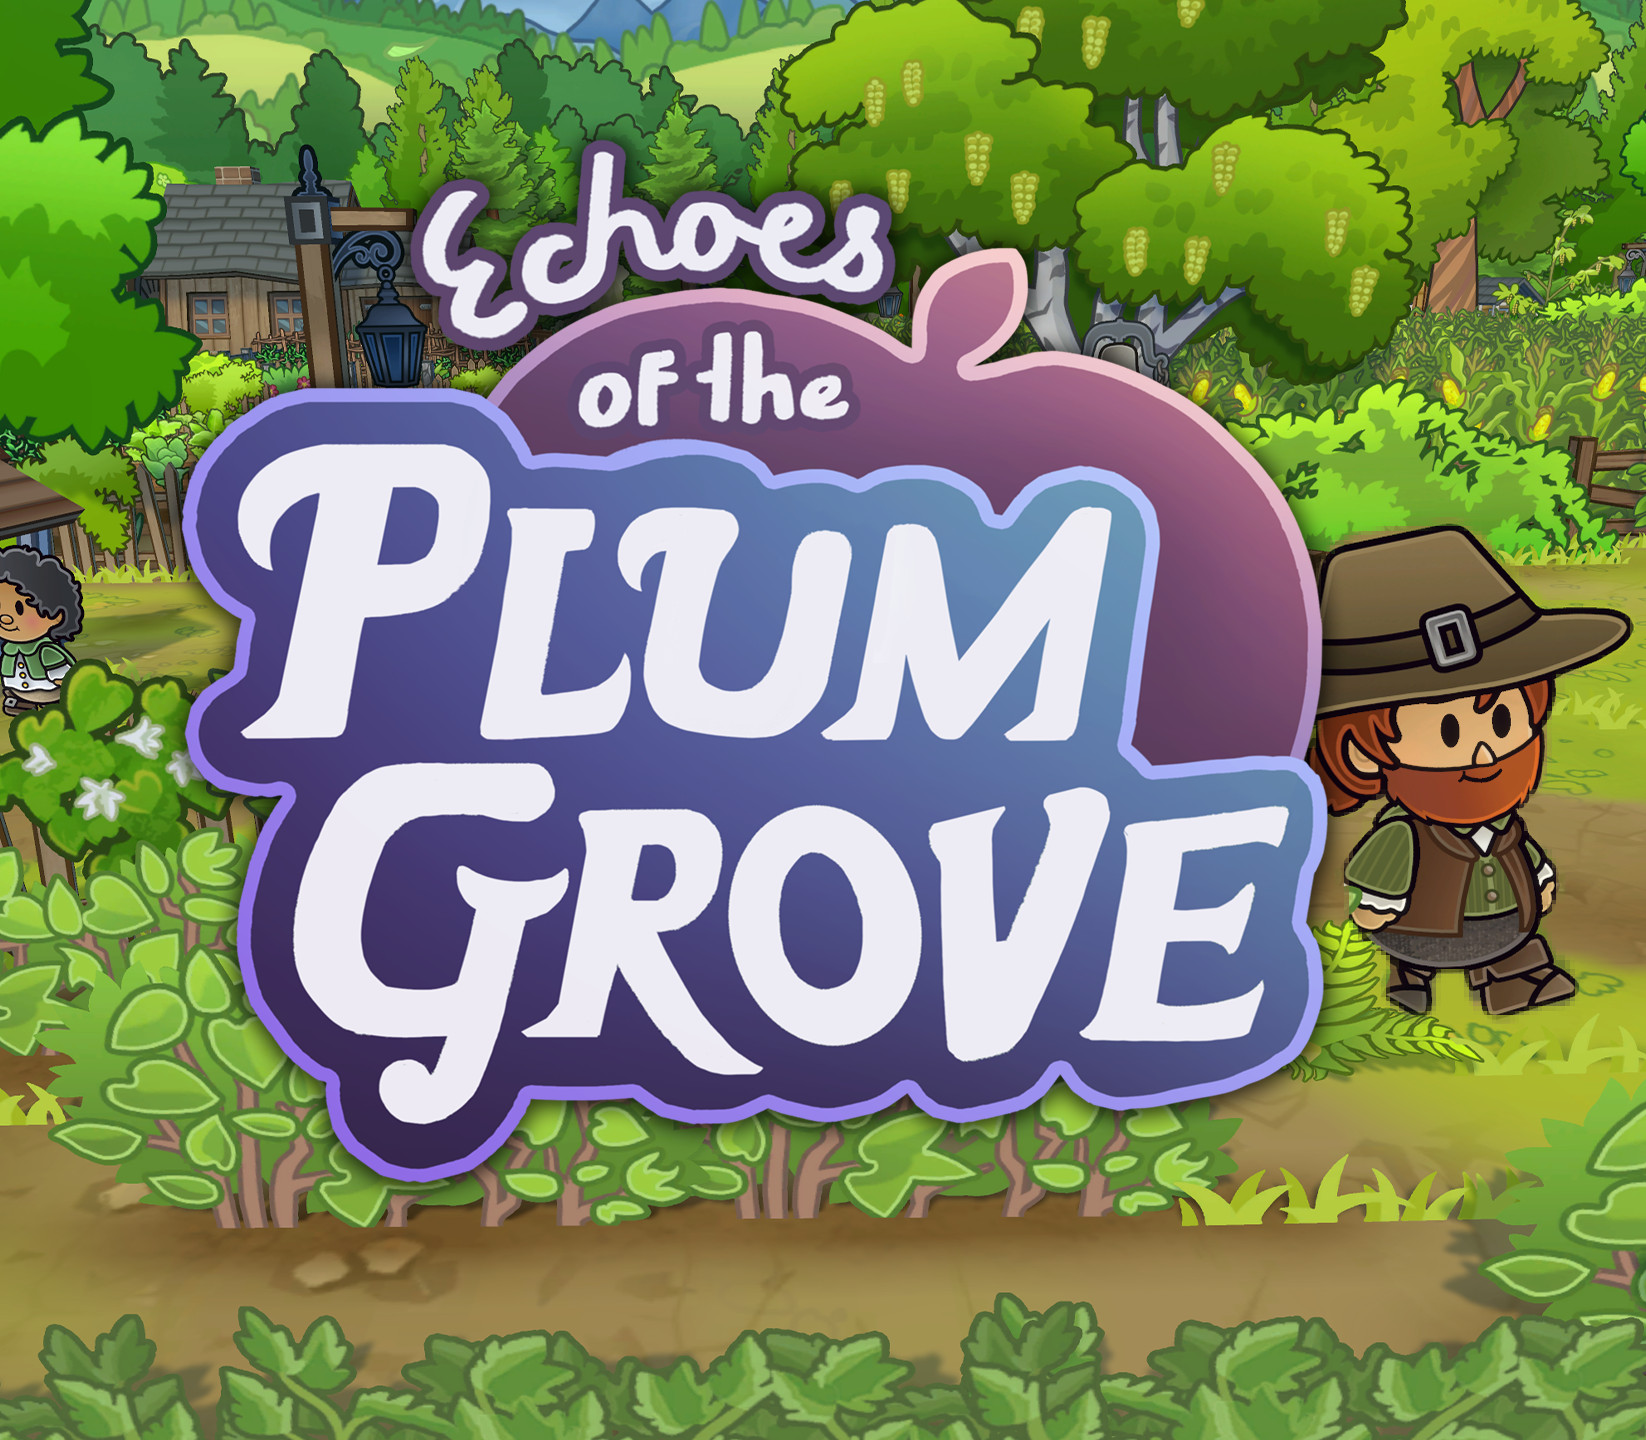 Echoes of the Plum Grove Steam